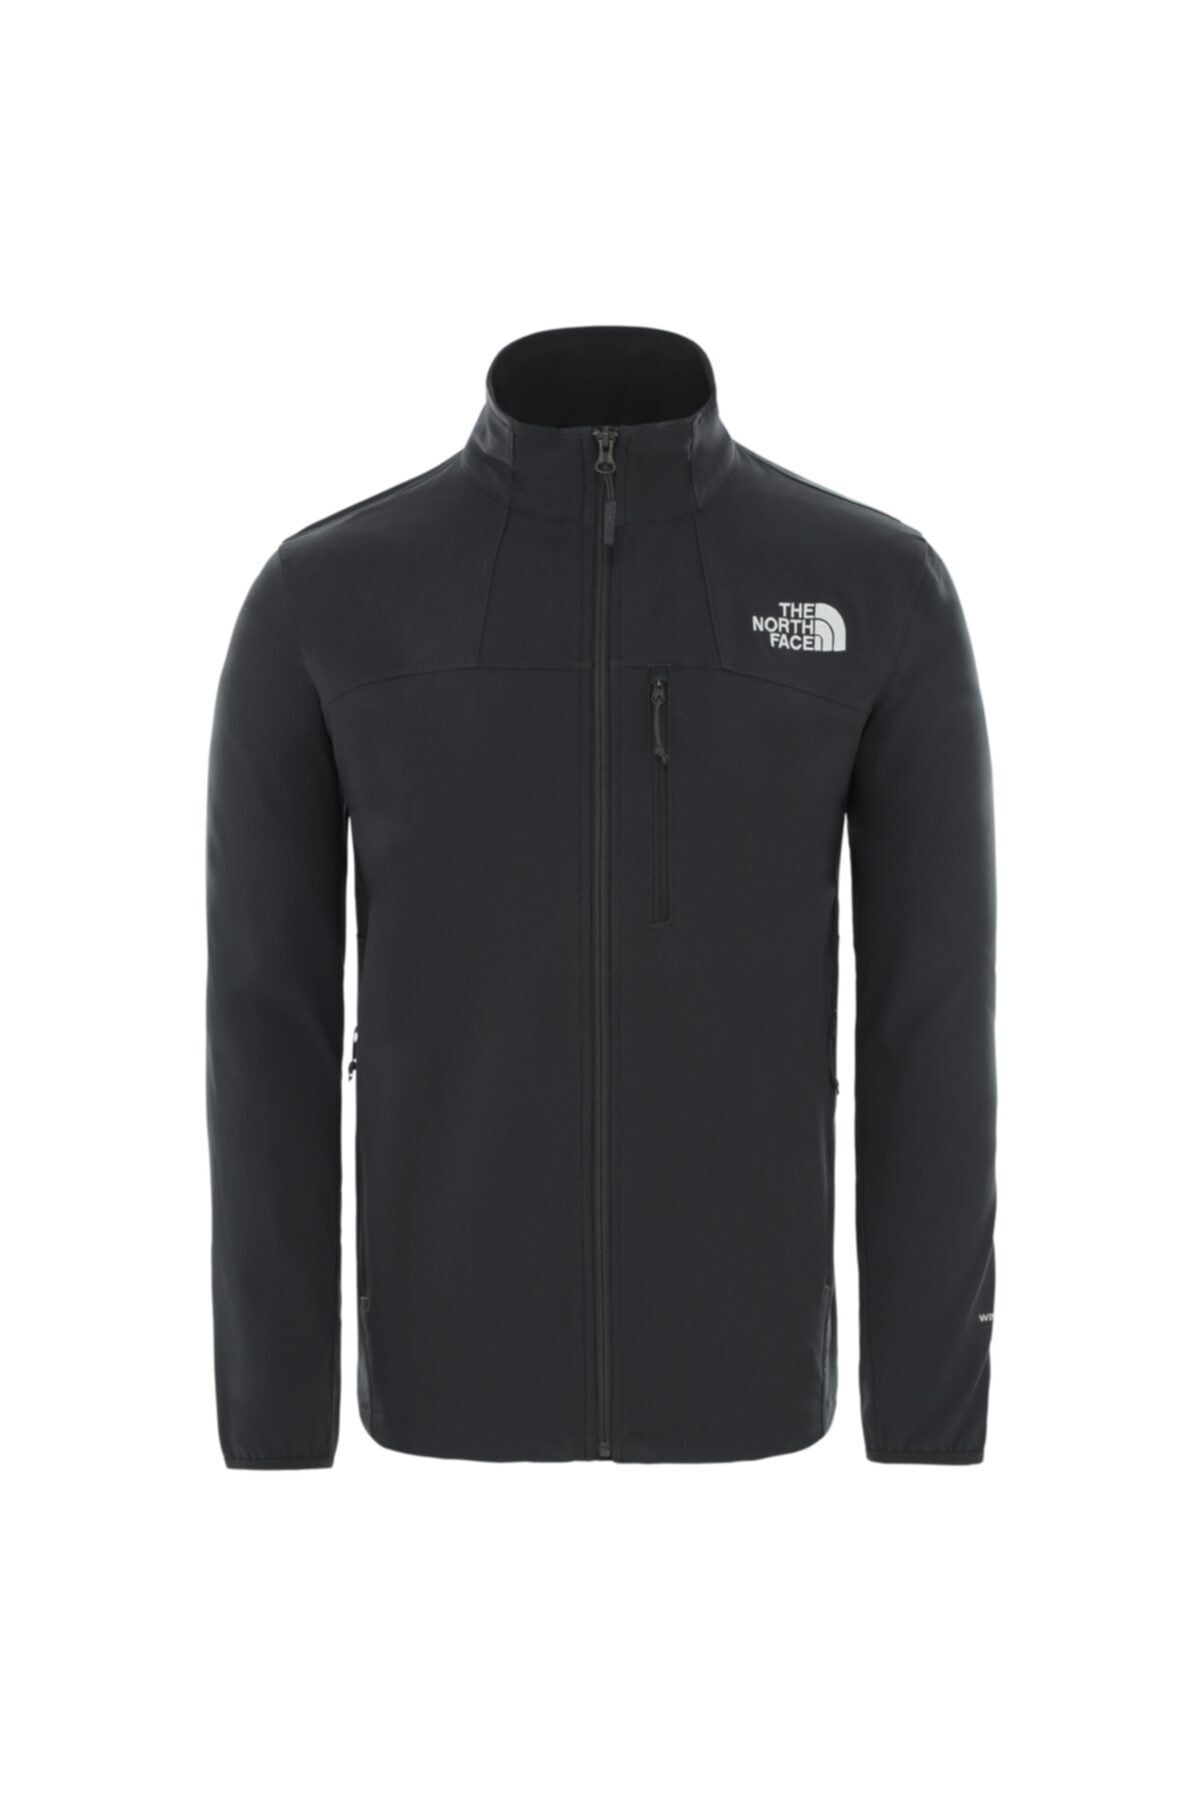 The North Face M Nımble Jacket Nf0a2tyg